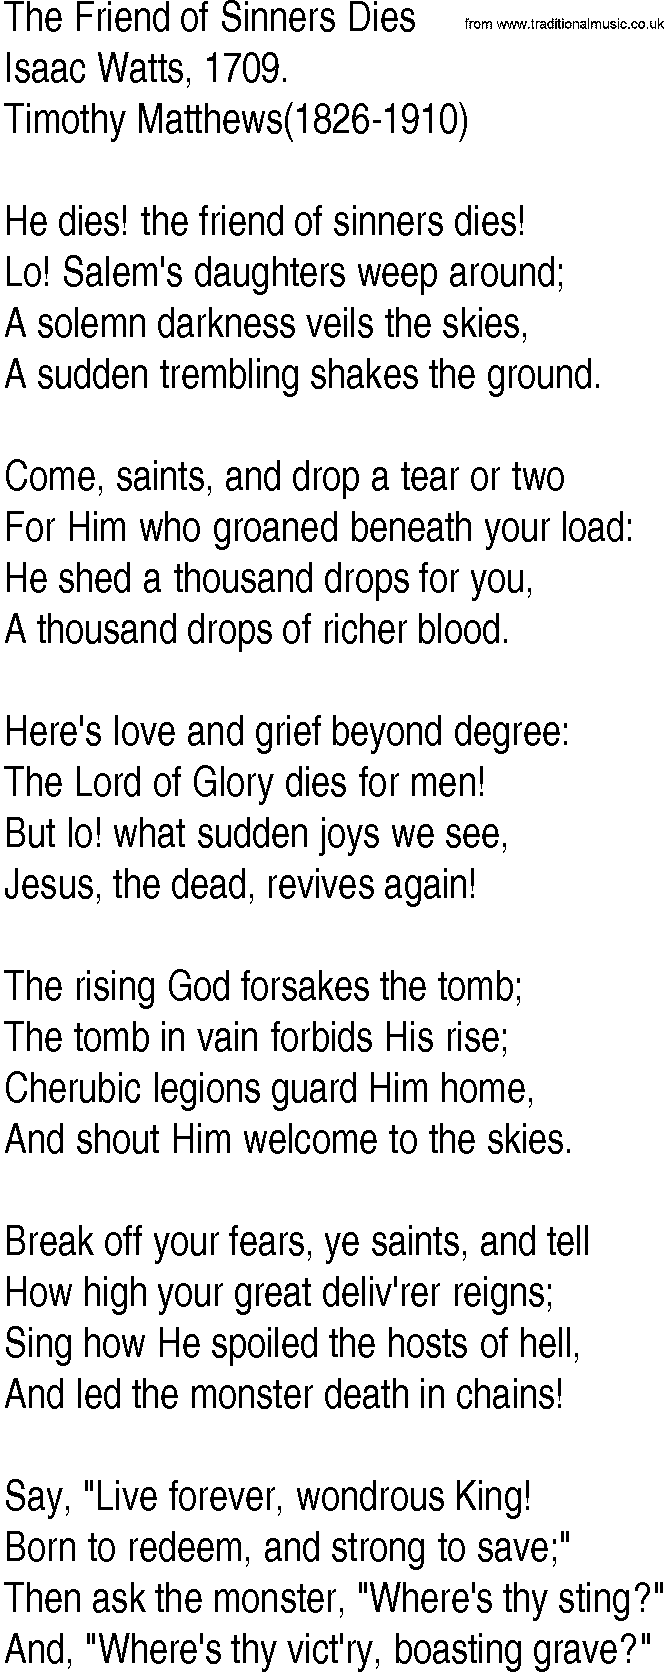 Hymn and Gospel Song: The Friend of Sinners Dies by Isaac Watts lyrics